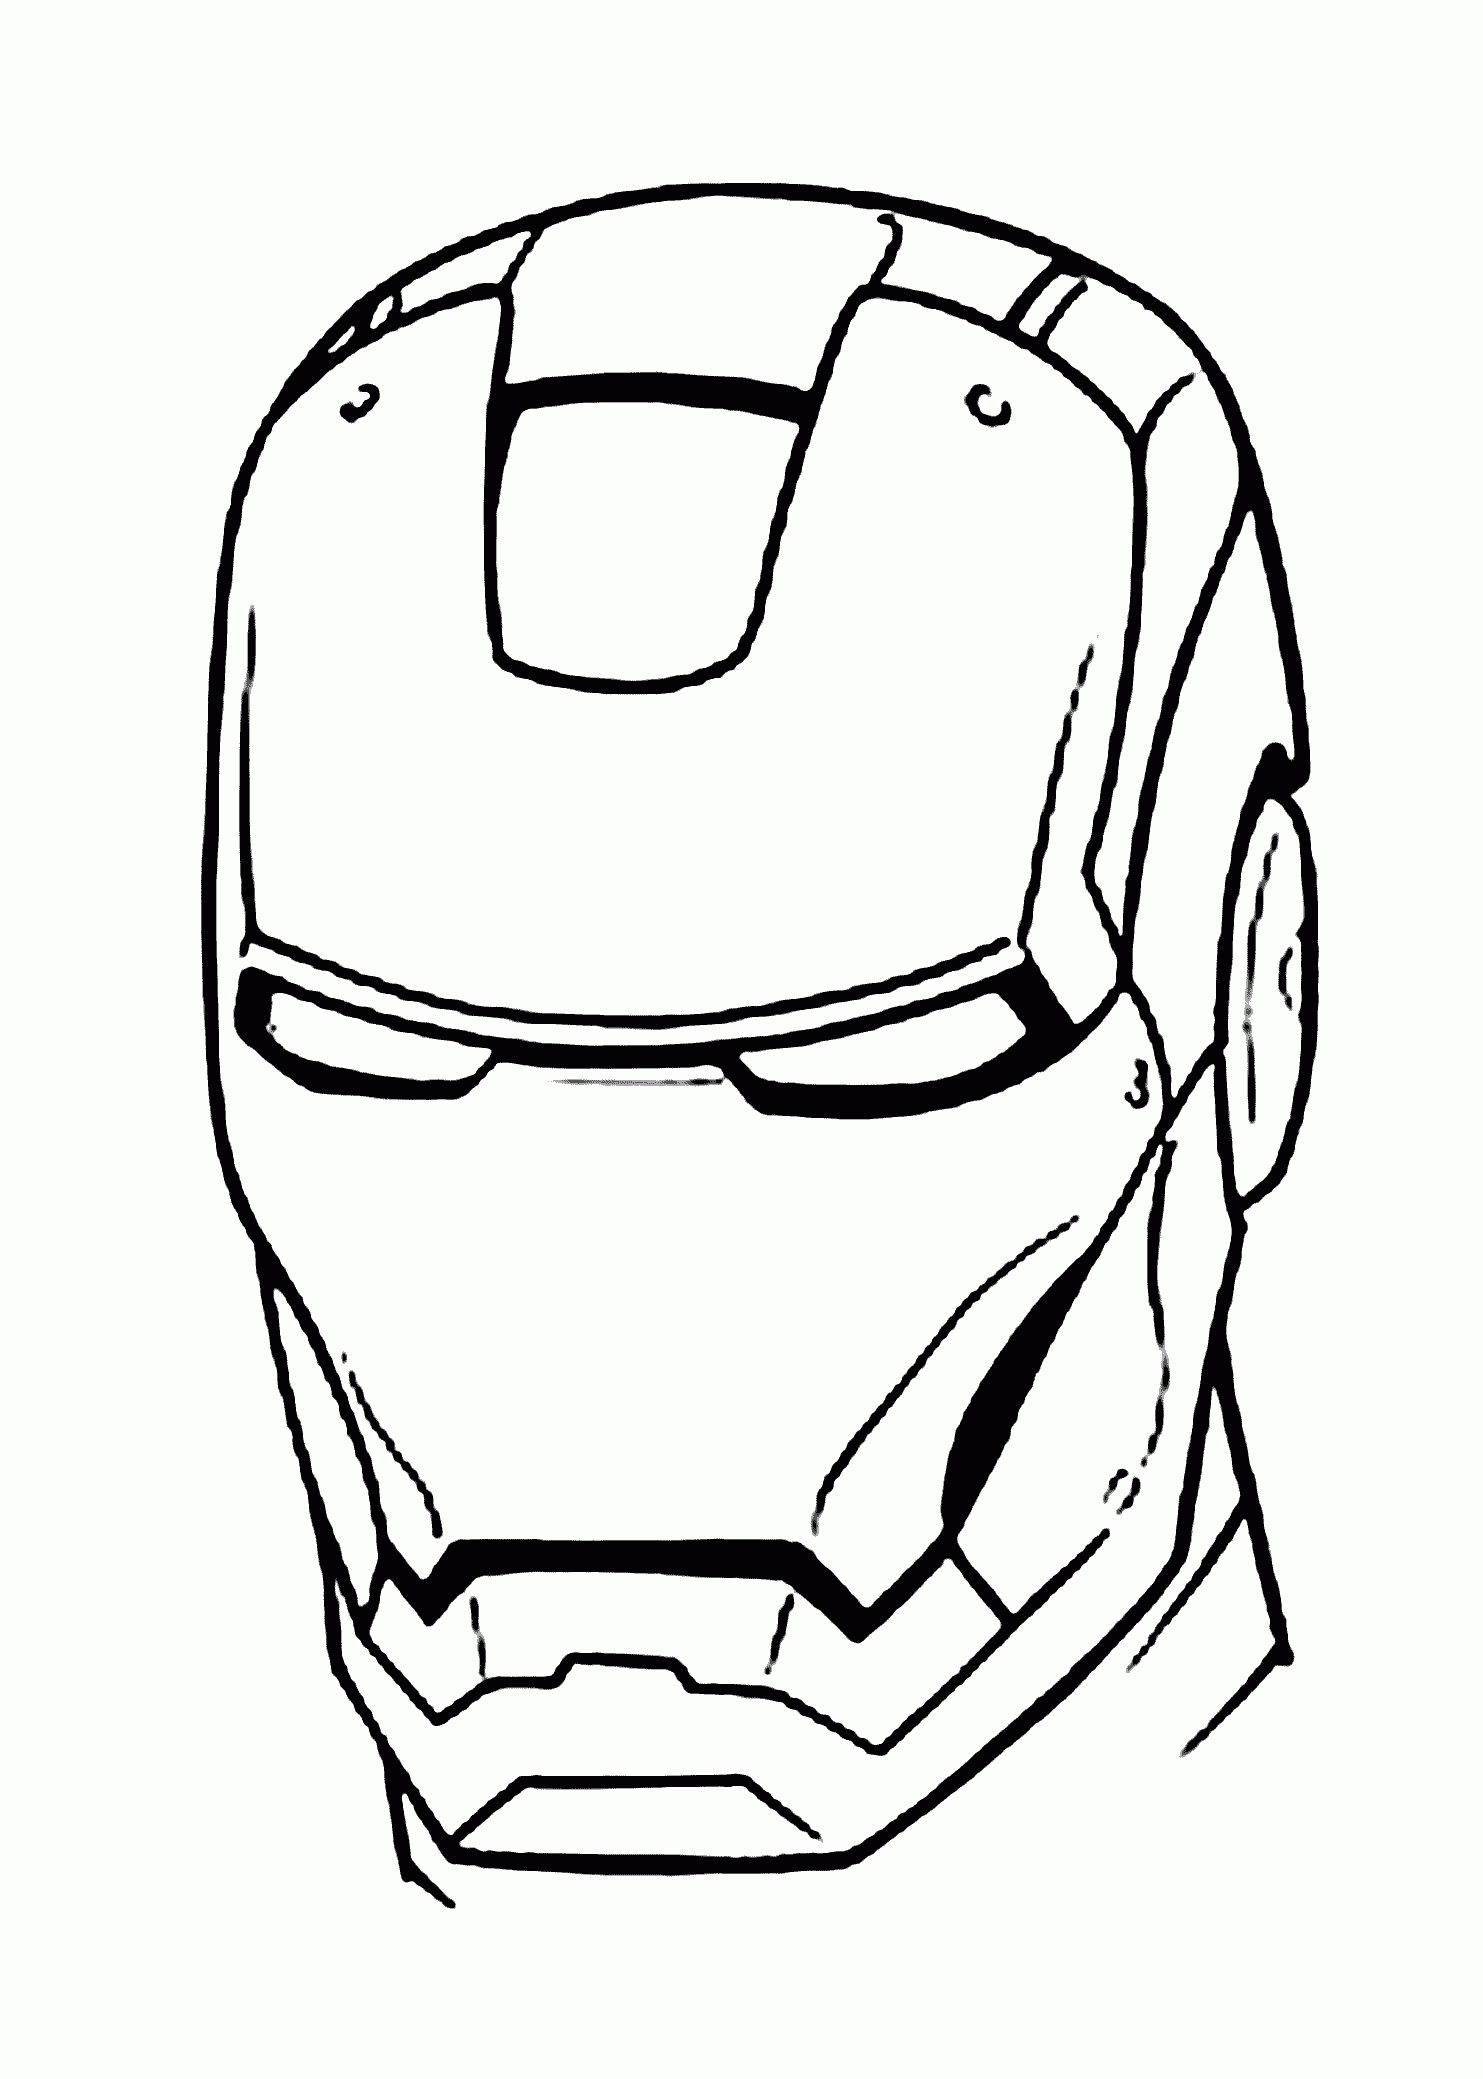 Iron Man Mask Coloring Pages For Kids Printable Free | Luke | Iron - Free Printable Ironman Mask